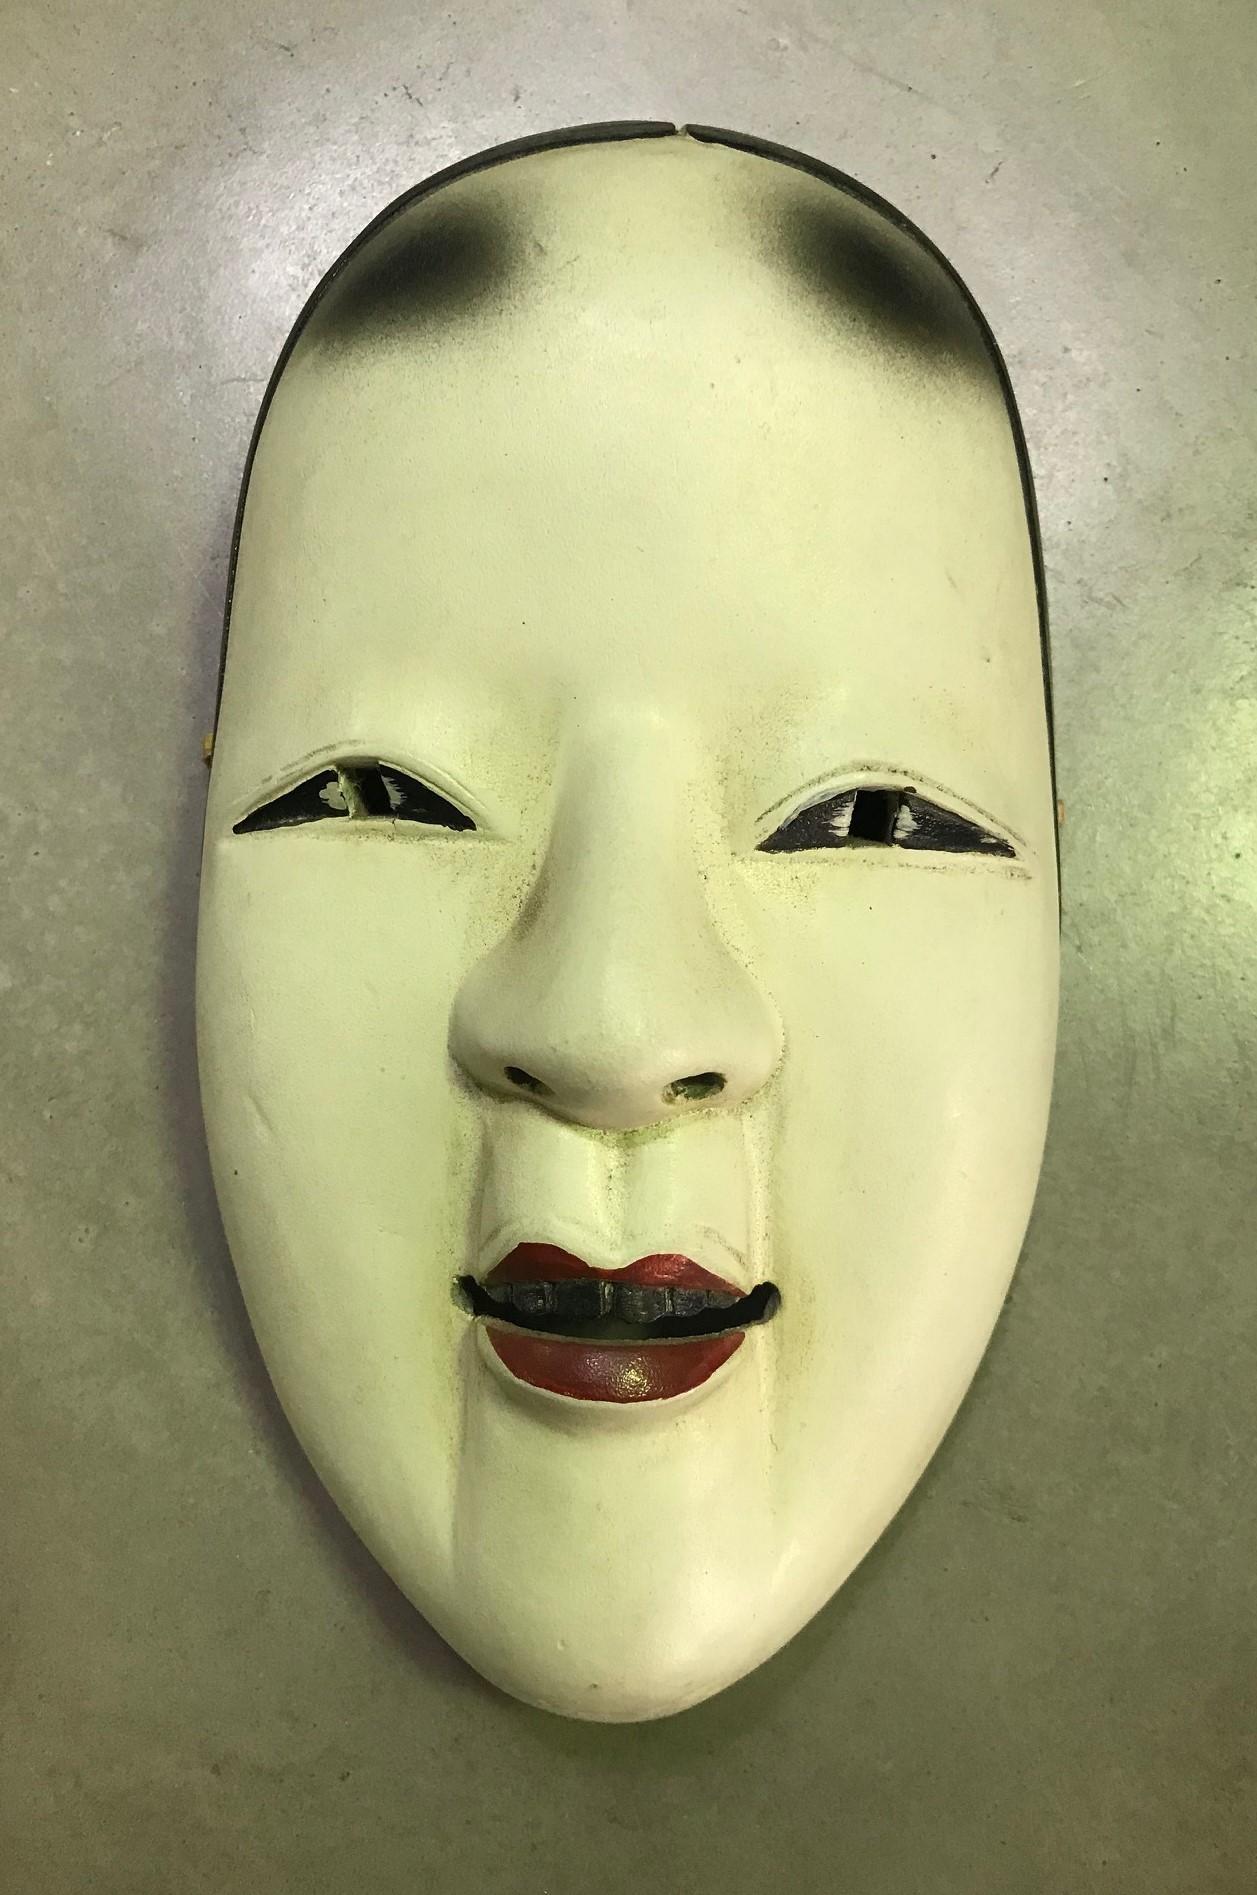 A beautiful, wonderfully crafted, alluring mask made for Japanese Noh theatre.
This mask is handcrafted and carved from natural wood.
Ko-omote translates as 